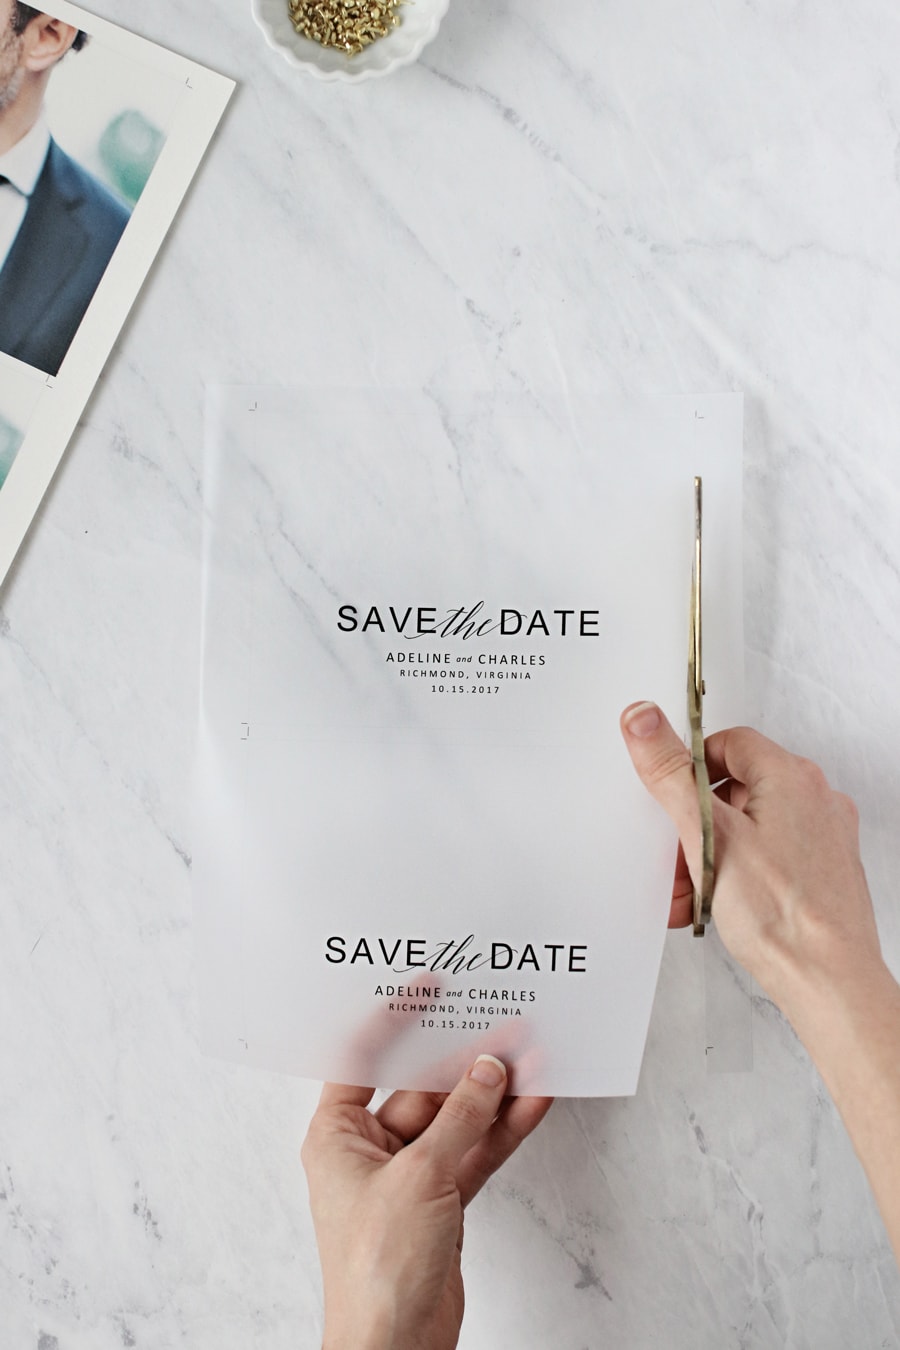 Think you can't make gorgeous save the dates at home? Use one of our free templates to make these vellum save the dates. We promise your guests will love them.